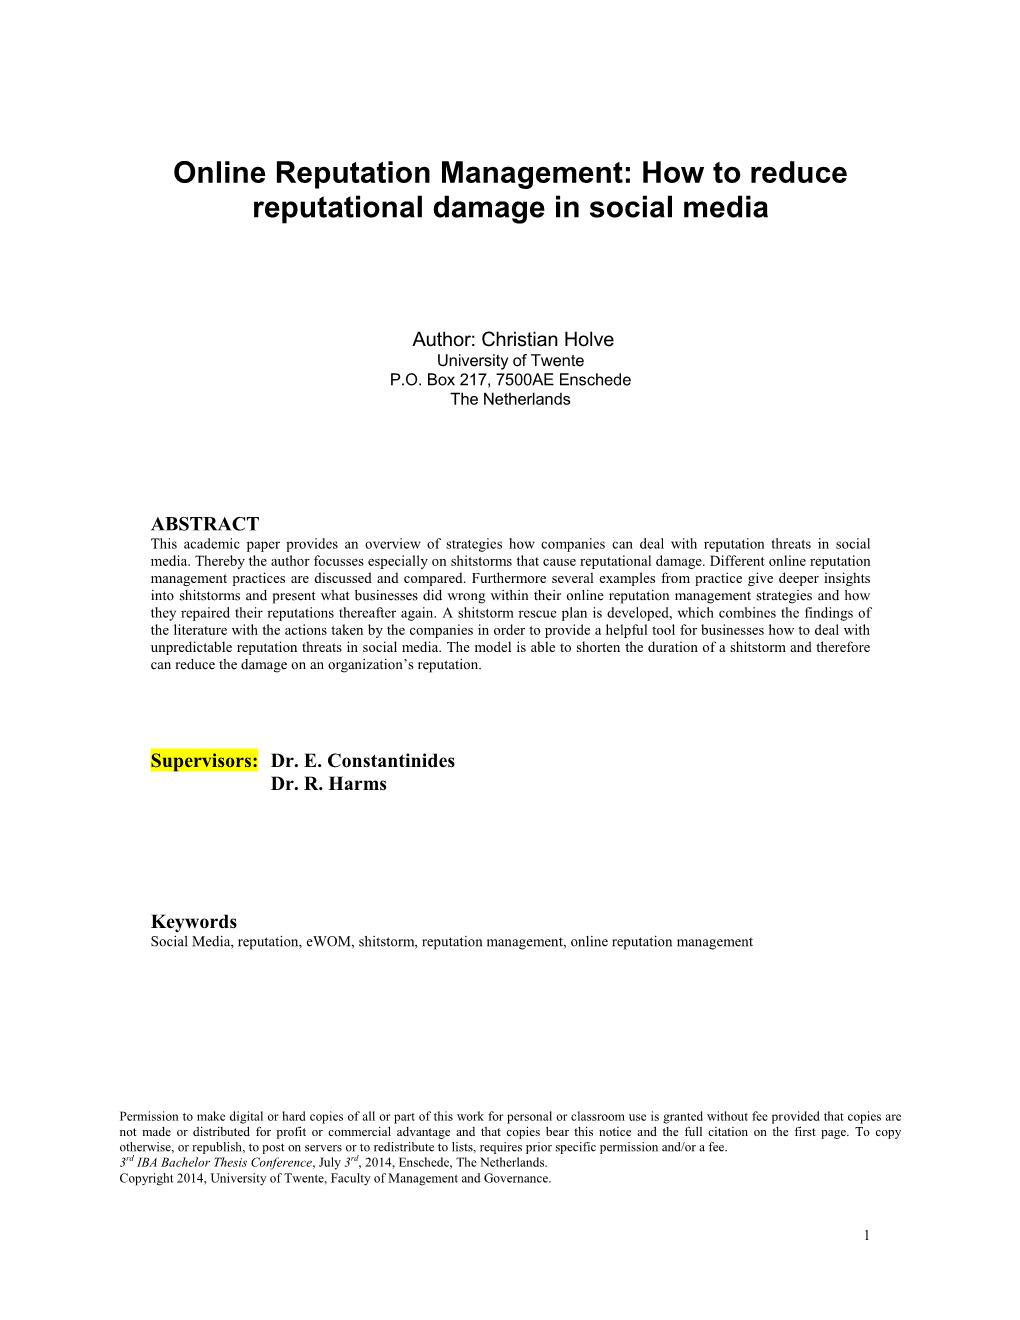 Online Reputation Management: How to Reduce Reputational Damage in Social Media